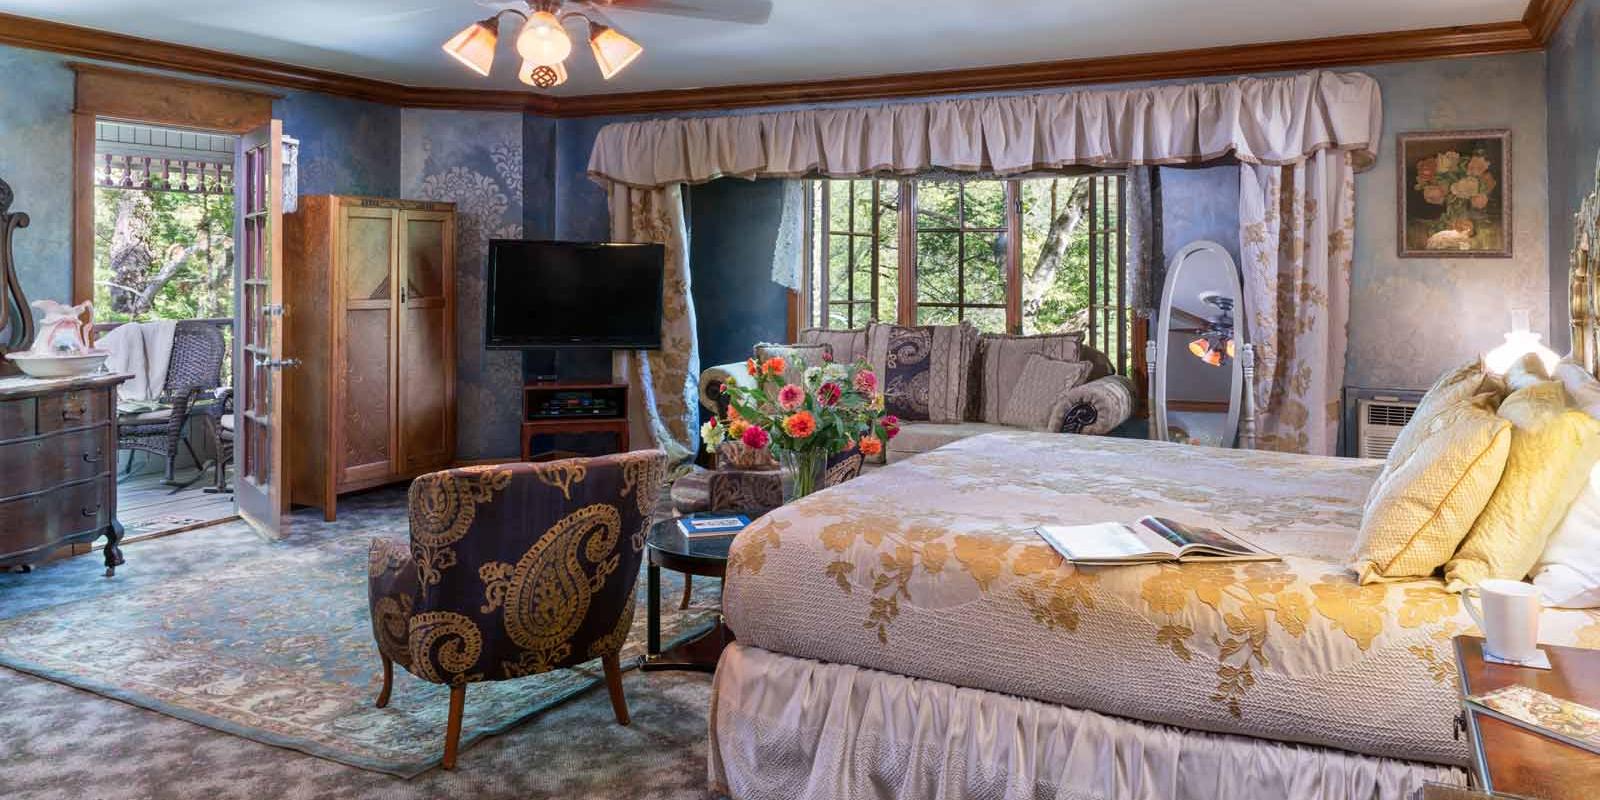 #1 Hotels in Eureka Springs AR | The Raphael Suite at The Angel at Rose Hall